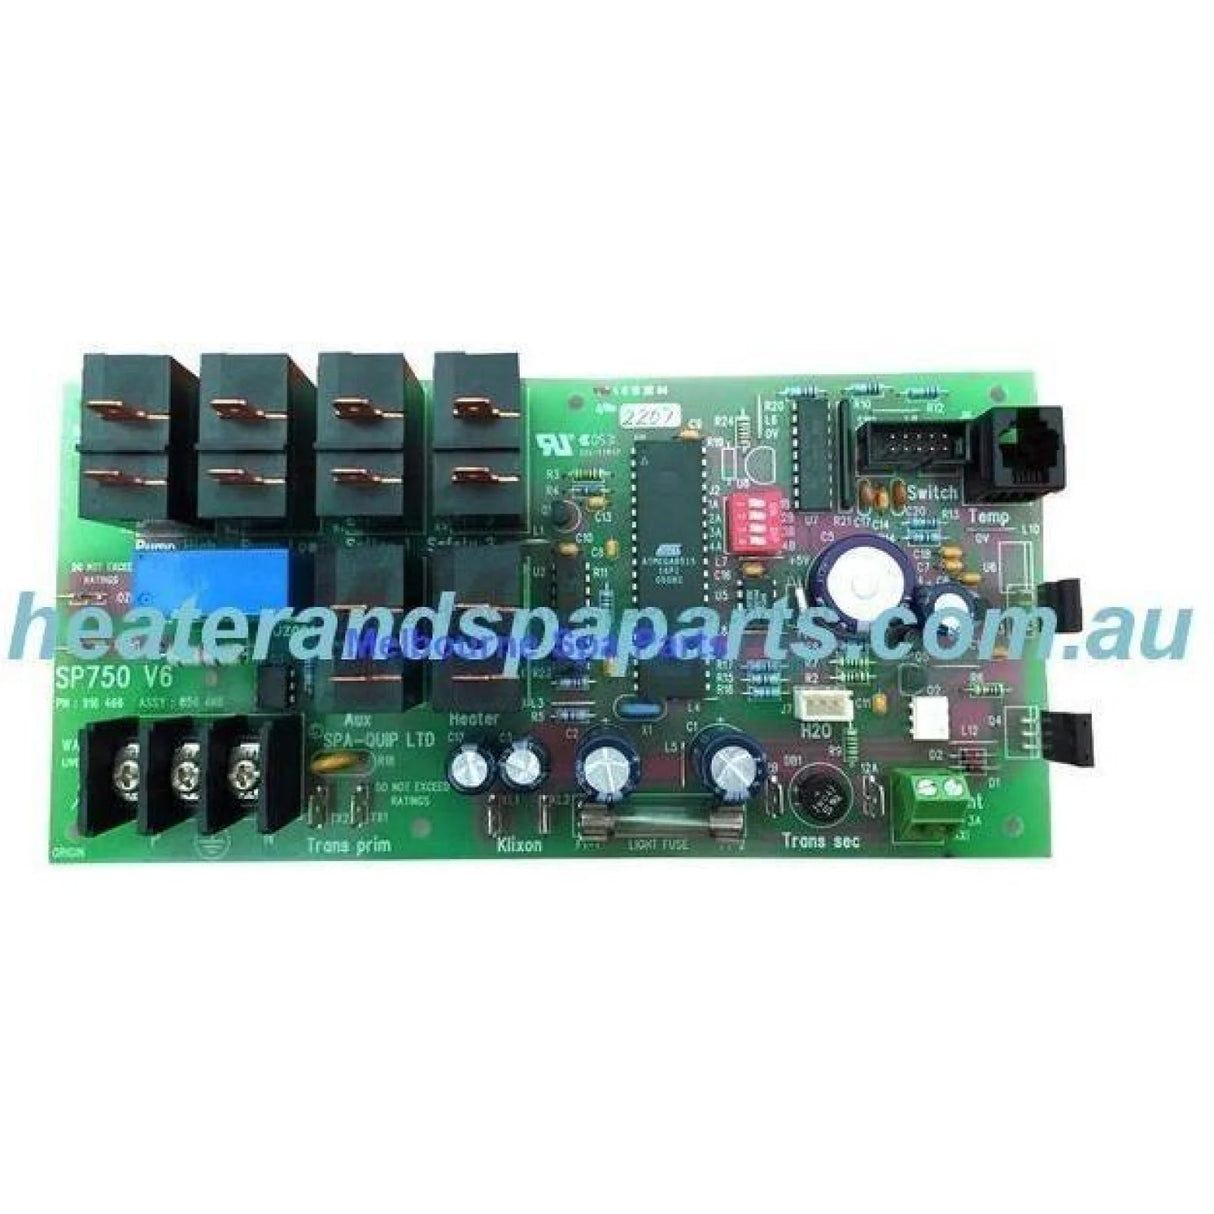 Spa Power 750 SP 750 Circuit Board PCB - Obsolete - Heater and Spa Parts